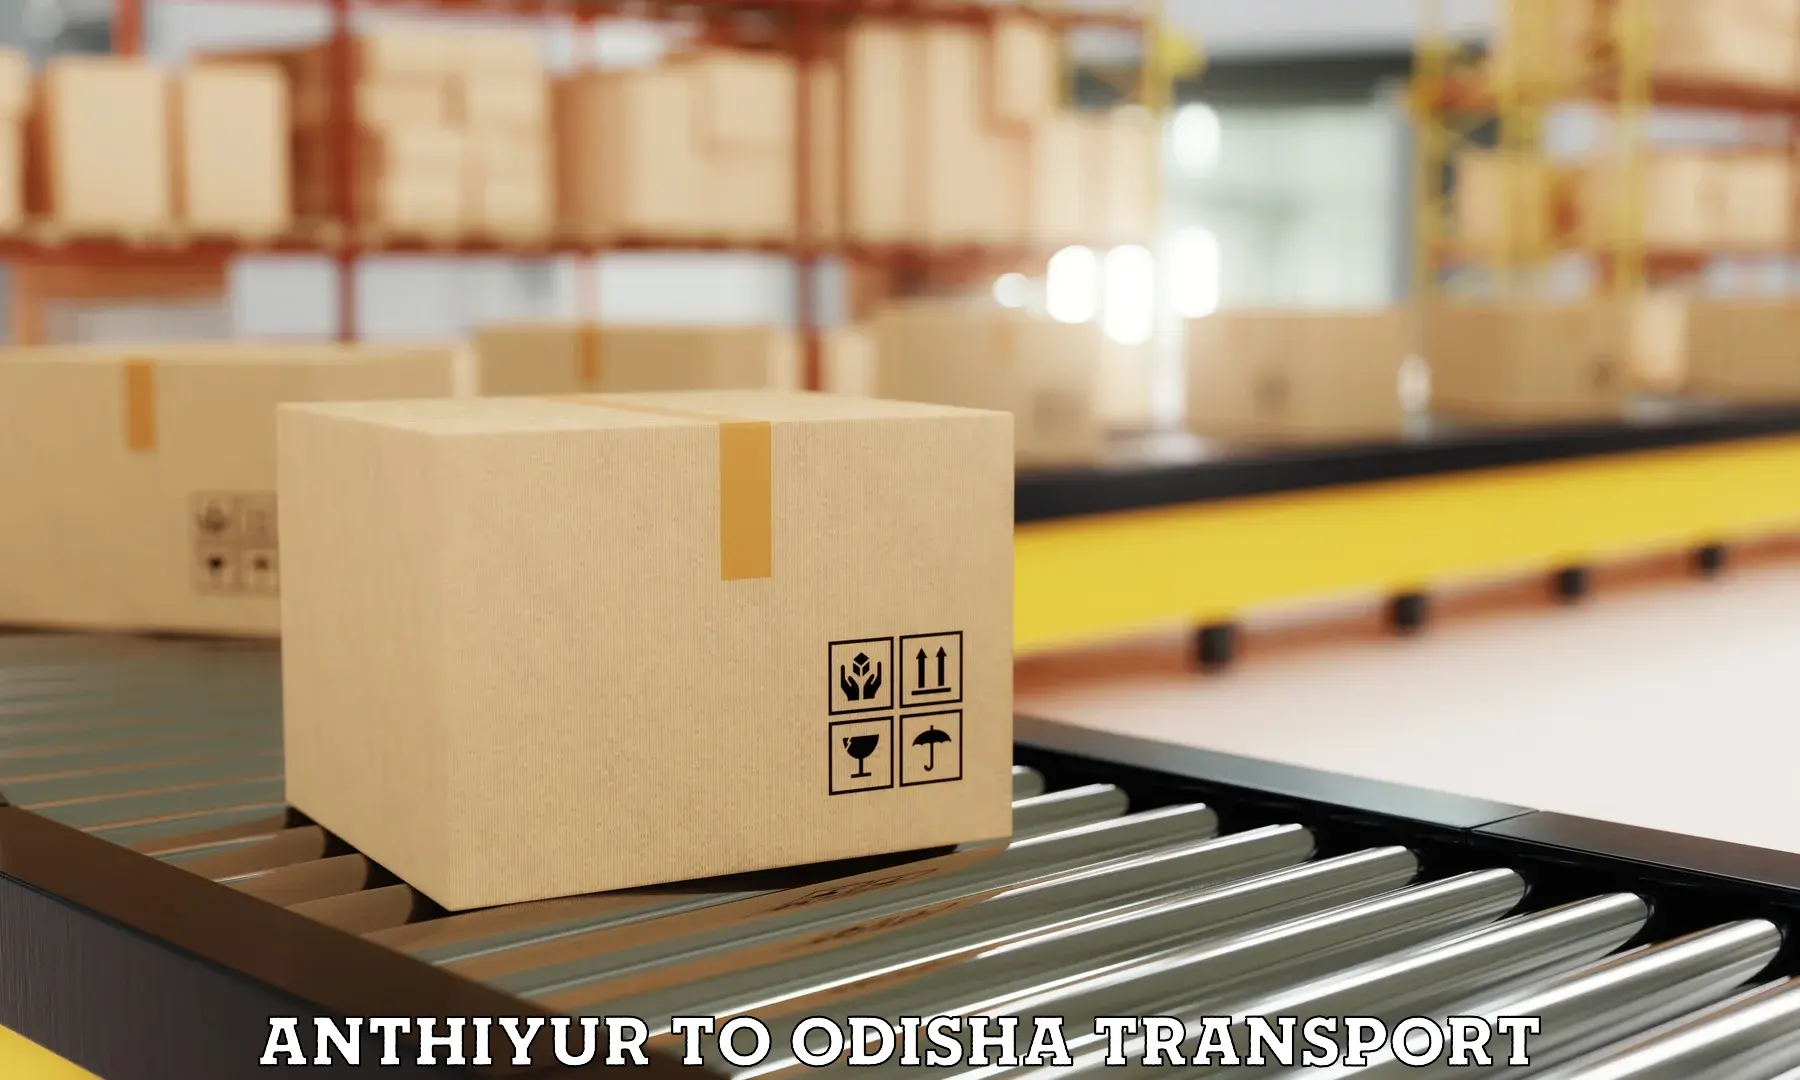 Container transport service Anthiyur to Balasore